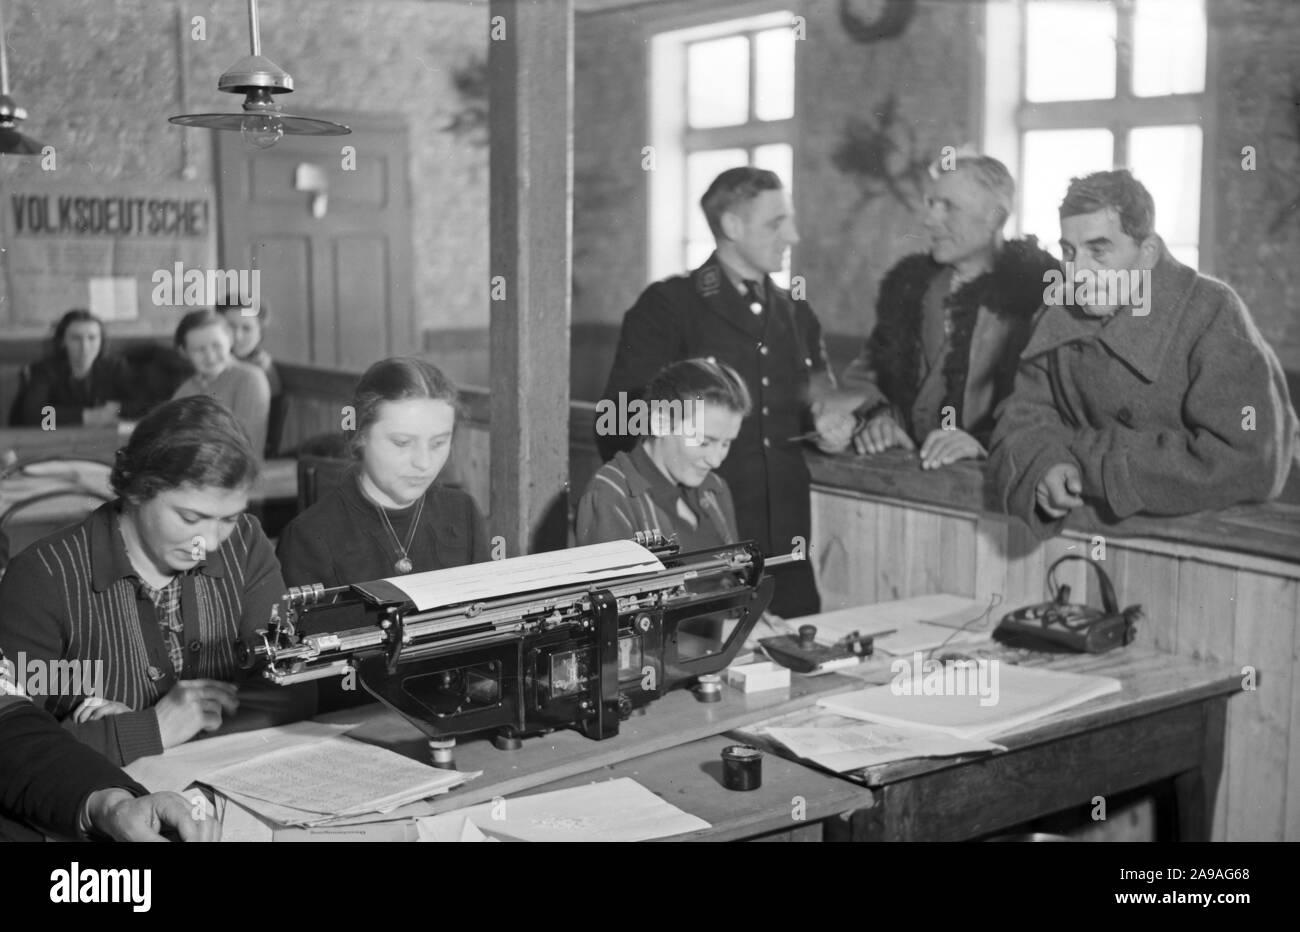 At the office of a refugee camp for 'Volksdeutsche' refugees, Germany 1940s. Stock Photo